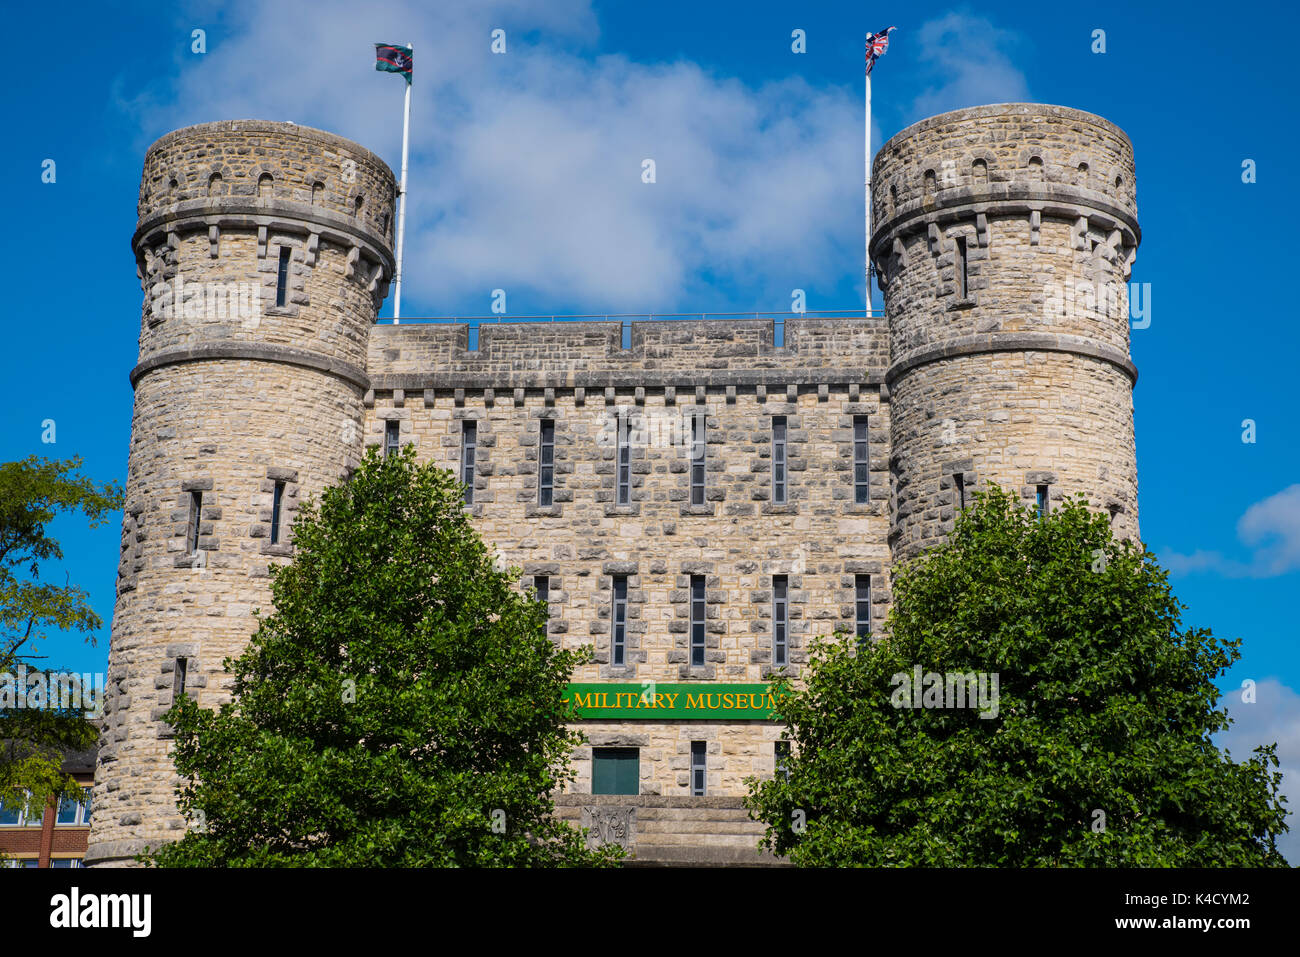 The towers of the Keep in Dorchester, Dorset.  The Keep now houses the Military Museum for Devon and Dorset. Stock Photo